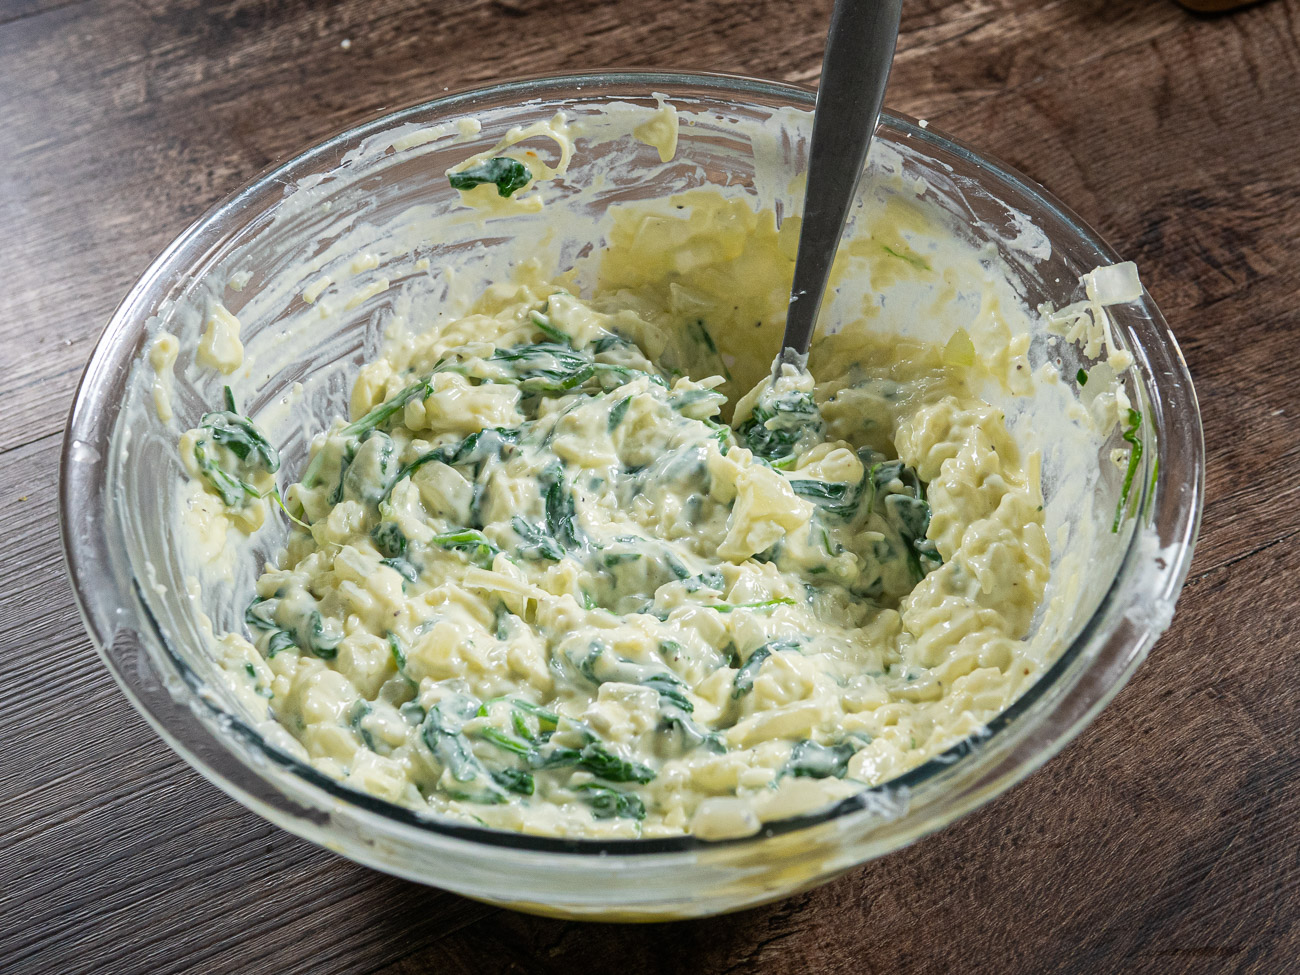 Remove spinach mixture to a bowl and mix with 1 cup ricotta, 1 1/2 cups mozzarella cheese, and egg. Set aside.